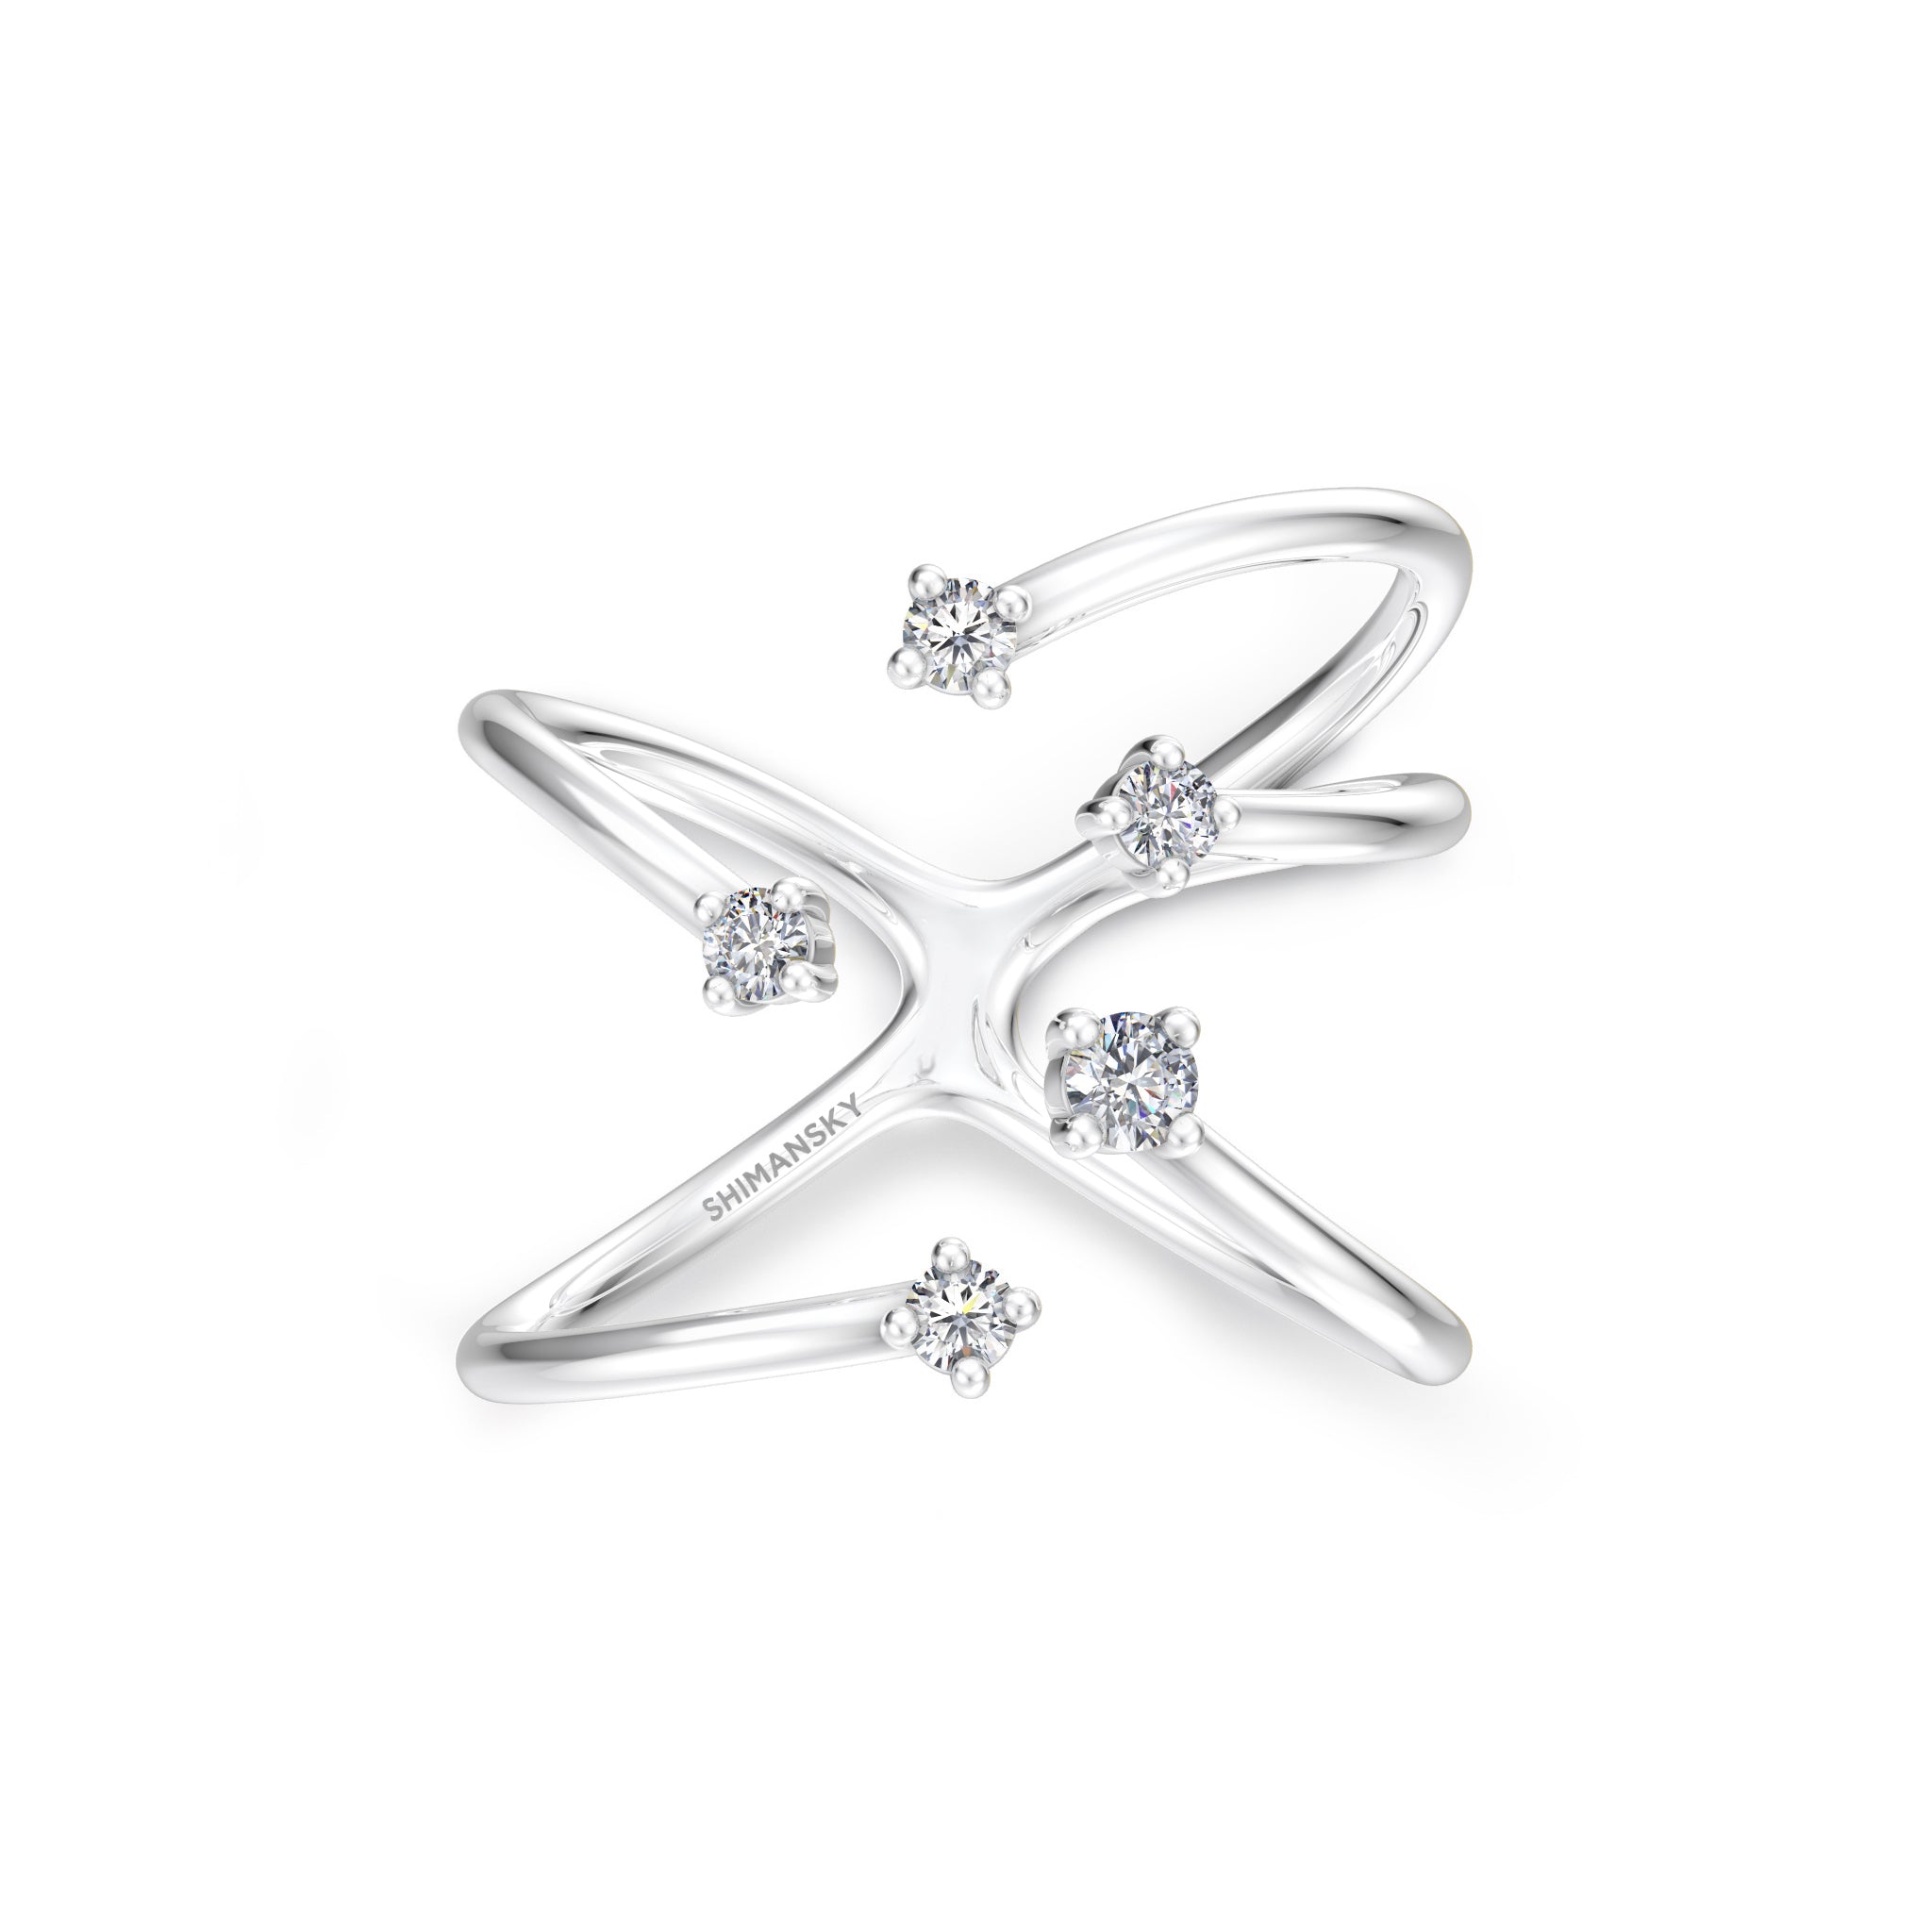 Shimansky - Southern Cross Small Diamond Ring Crafted in 14K White Gold